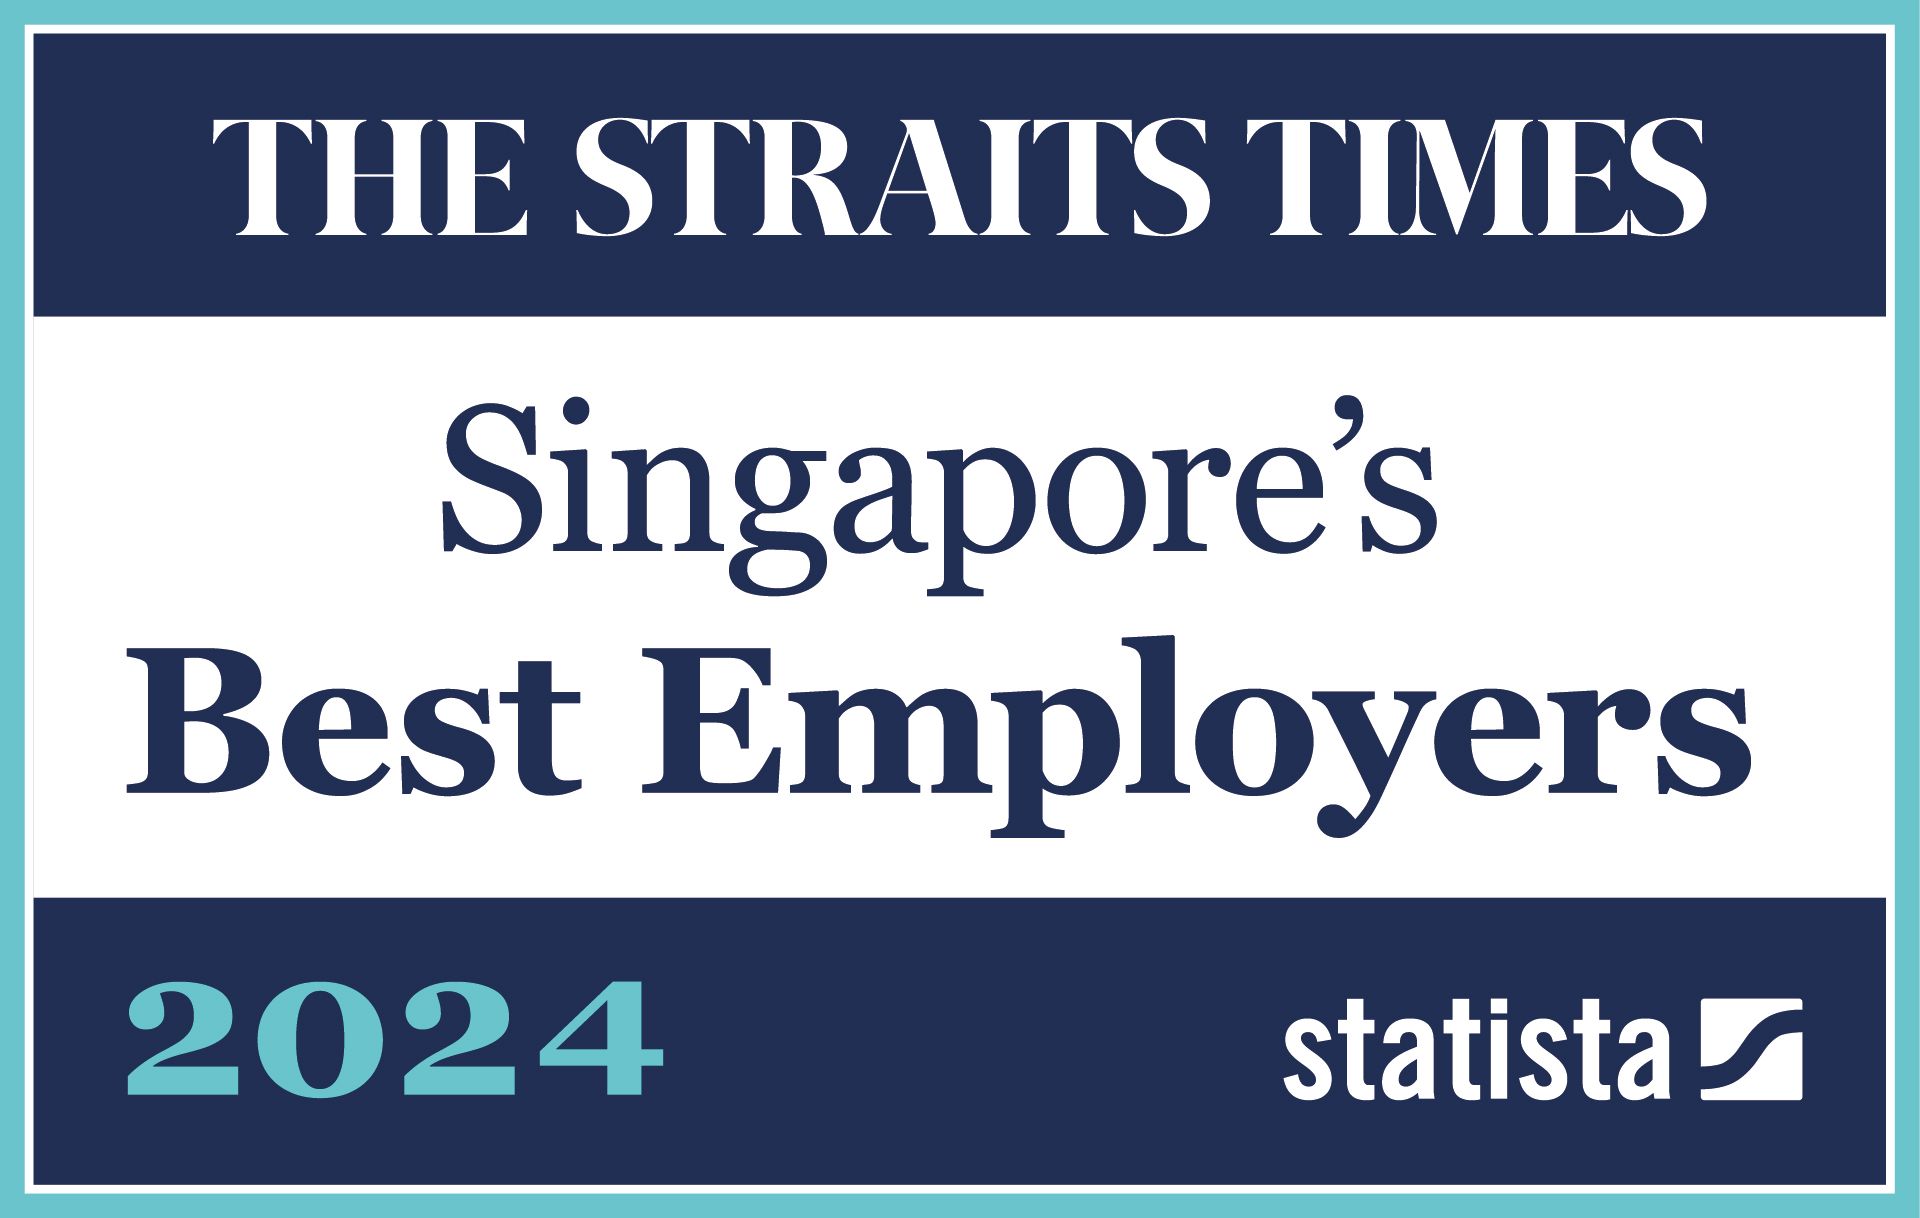 The Straits Times - Singapore's Best Employer 2024